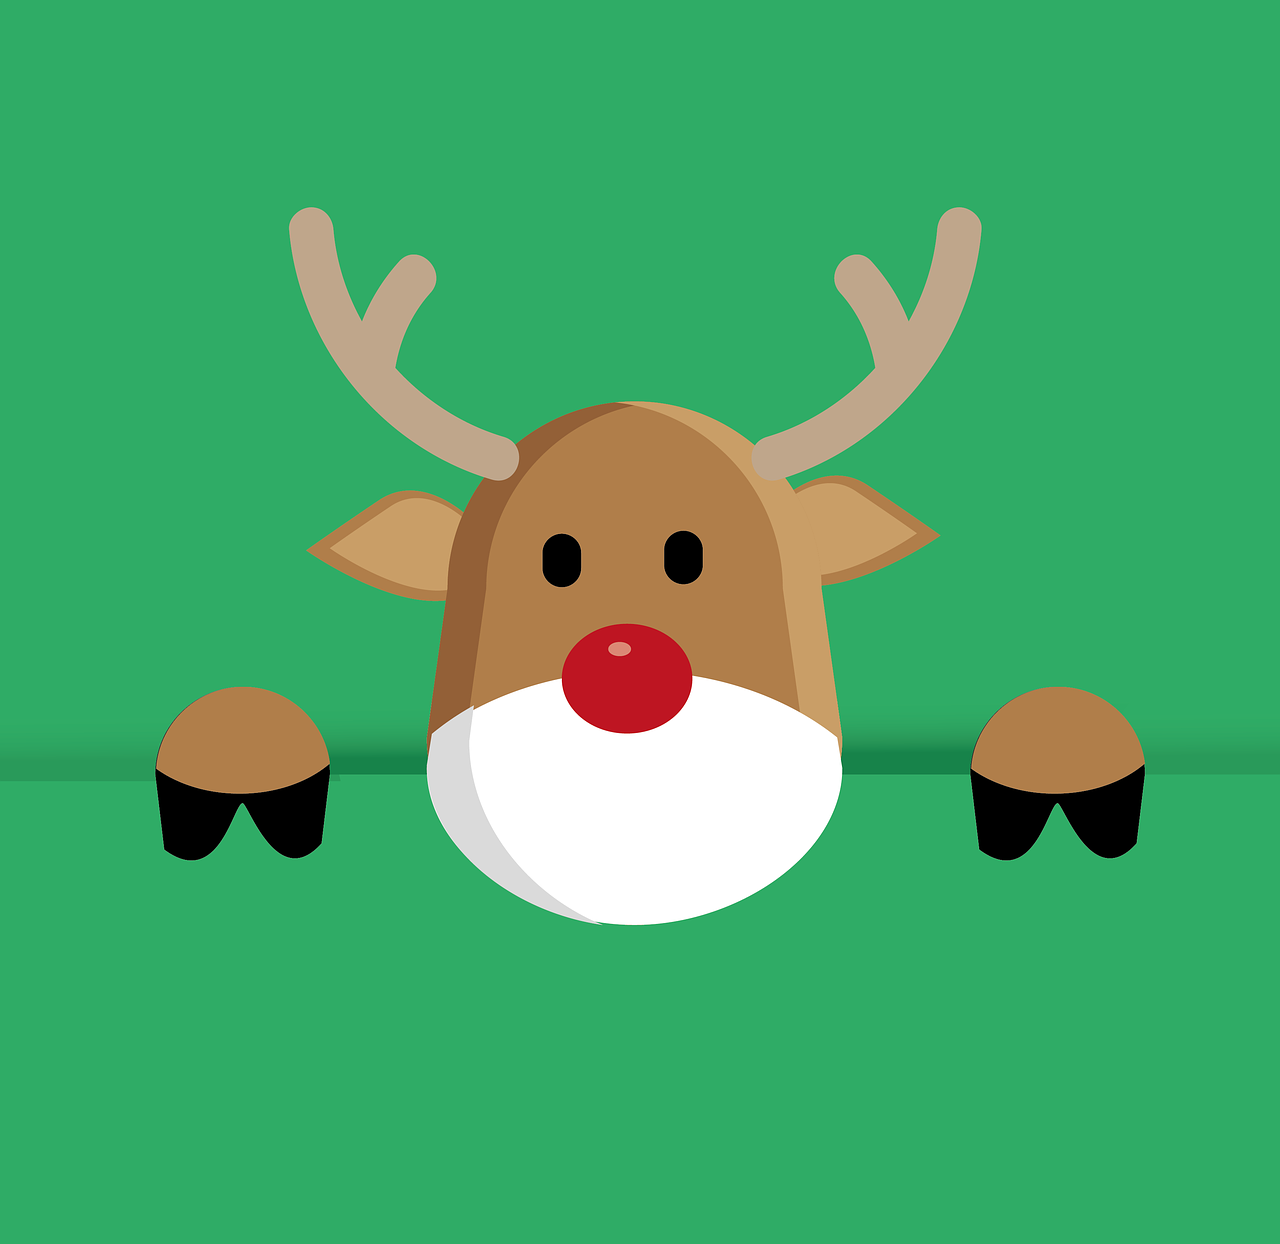 a reindeer with a red nose on a green background, happening, simple 2d flat design, hiding behind obstacles, cute artwork, front camera